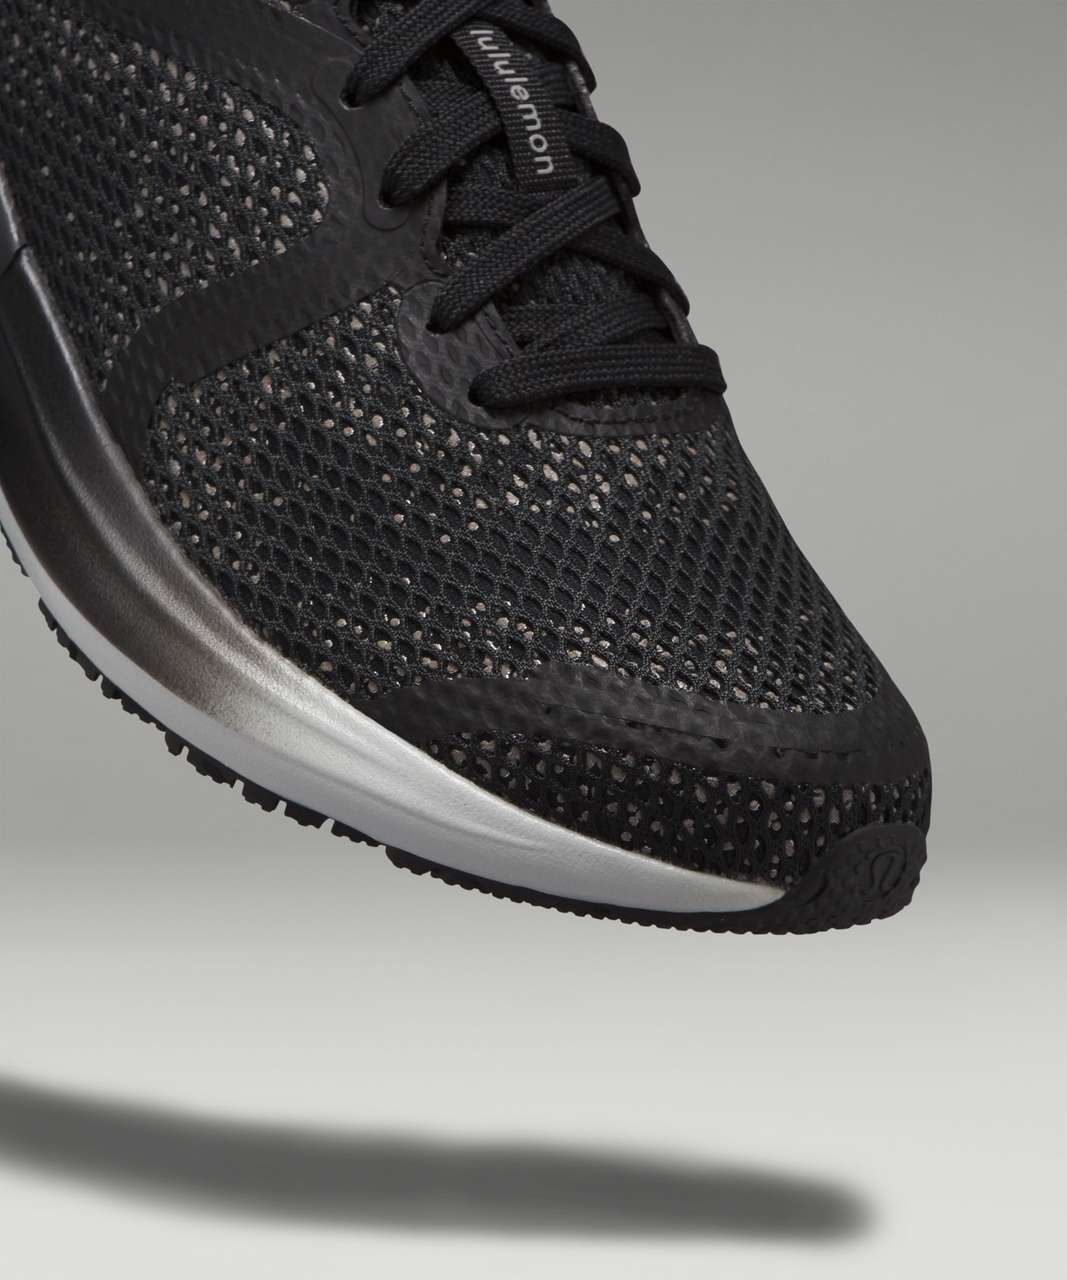 Leave Limits Behind With Lululemon's New Blissfeel Running Shoes